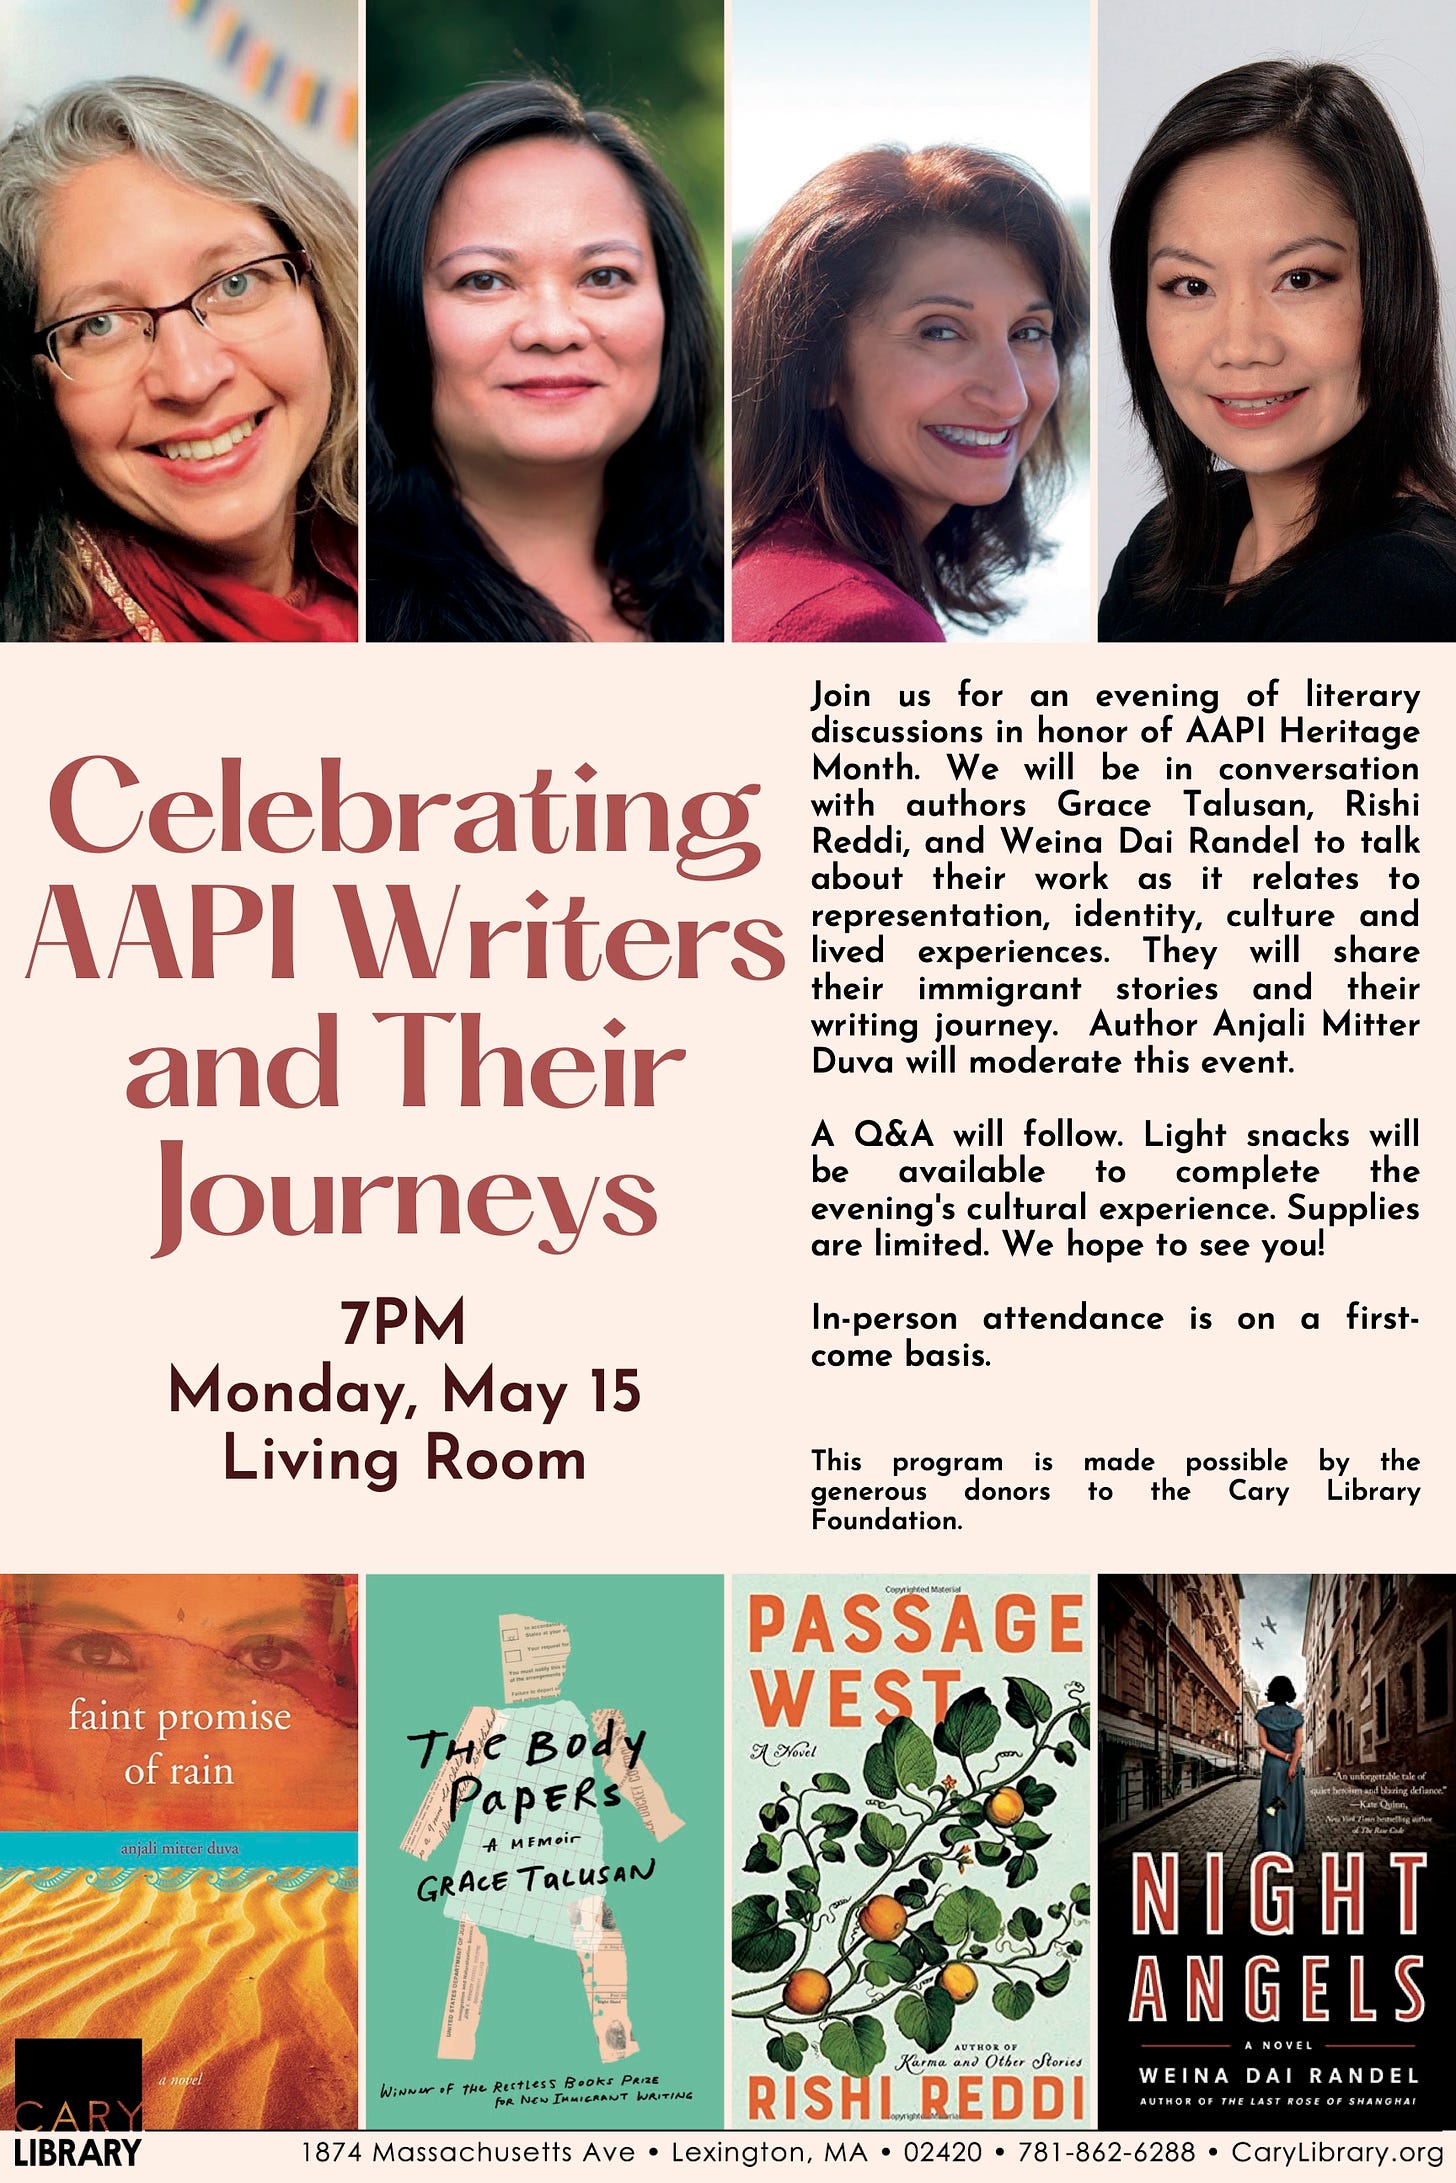 Poster featuring headshots of four female AAPI writers and text about the May 15 event at Cary Memorial Library.